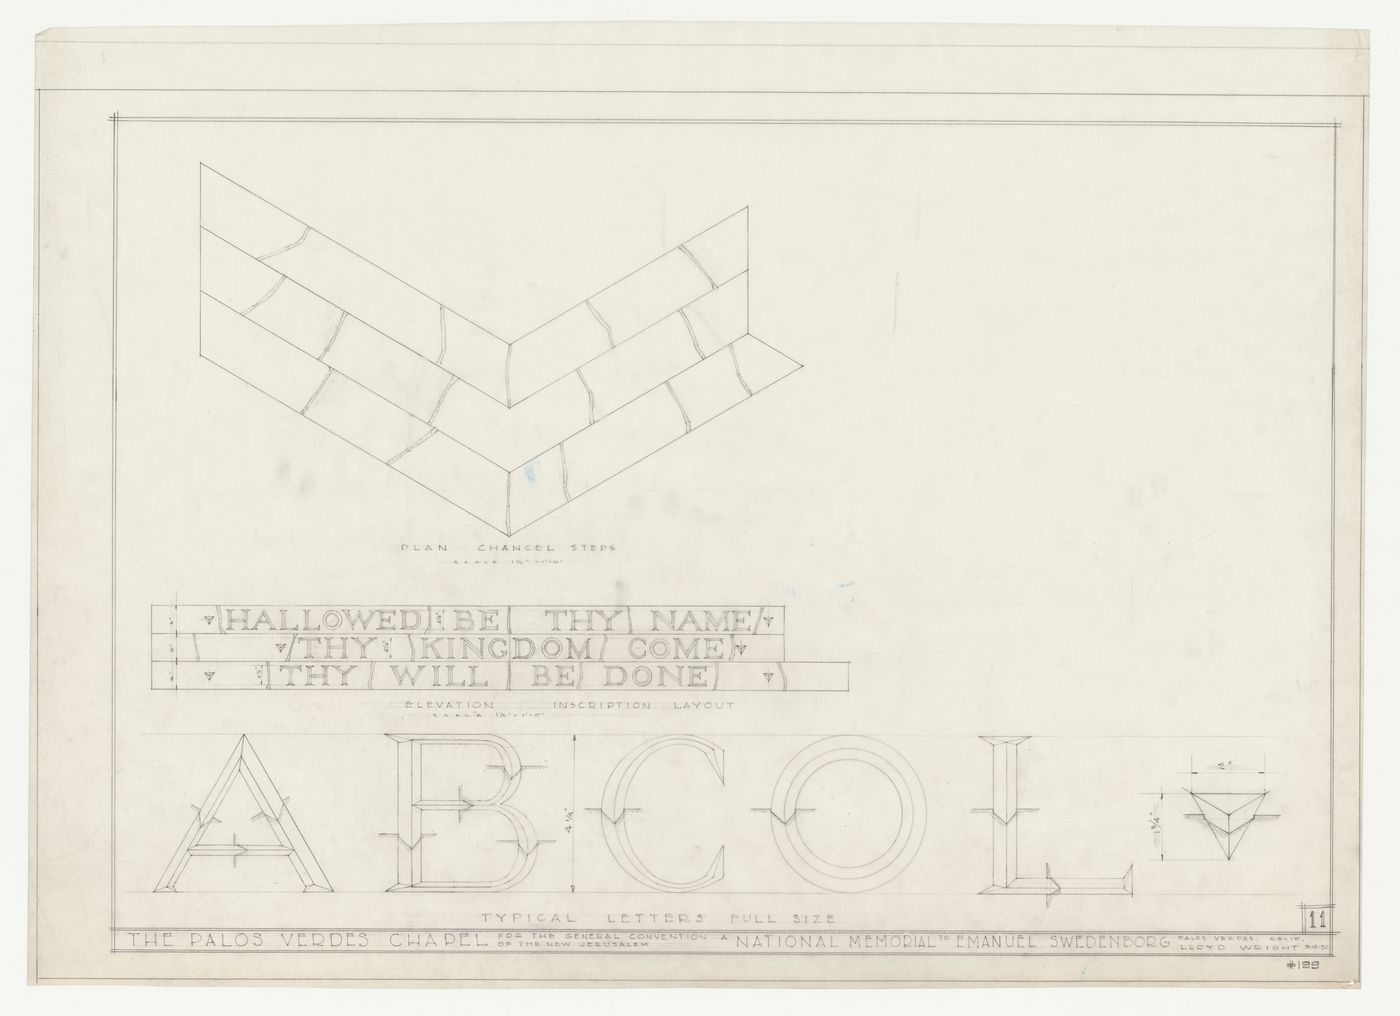 Wayfarers' Chapel, Palos Verdes, California: Plan for chancel steps with elevation showing inscription on the steps and with full size examples for lettering